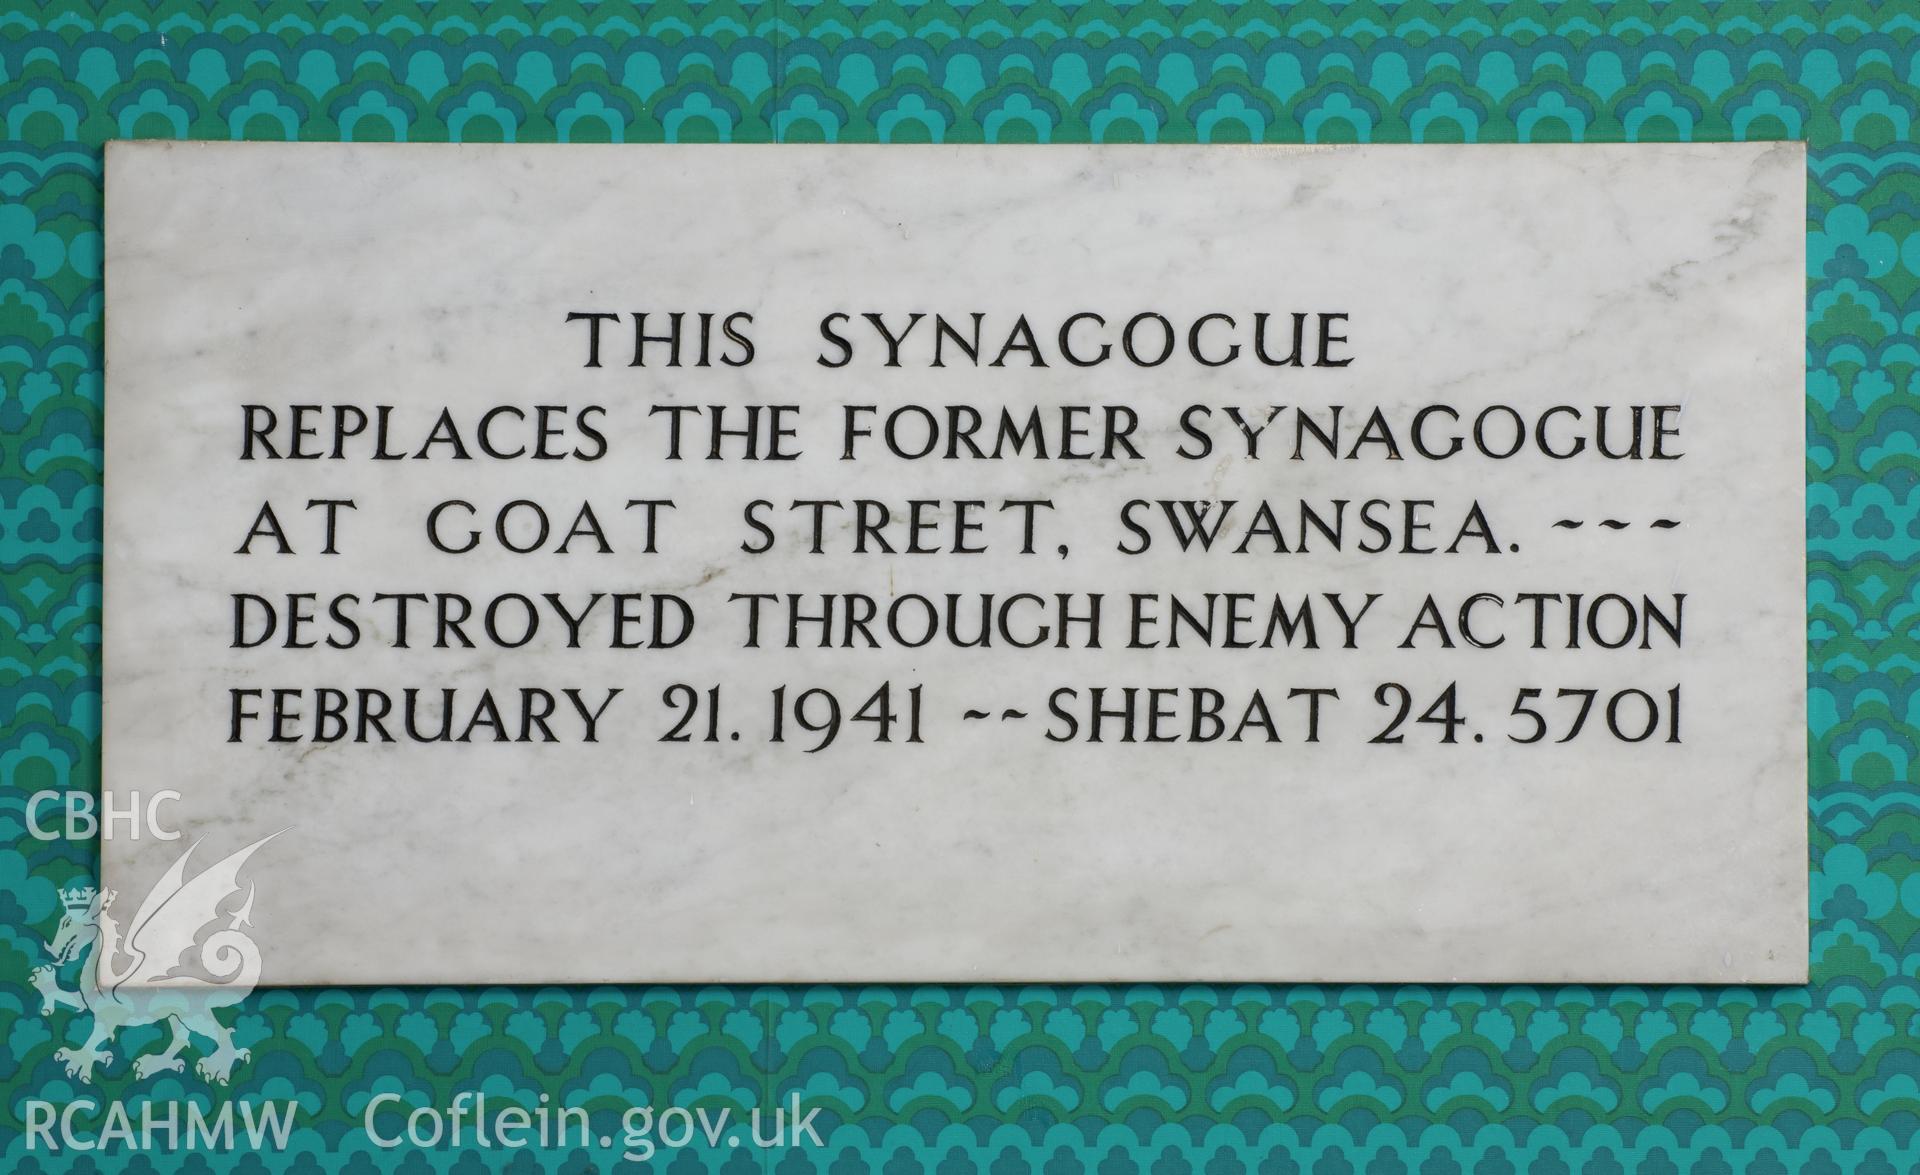 Memorial to the Goat street synagogue.